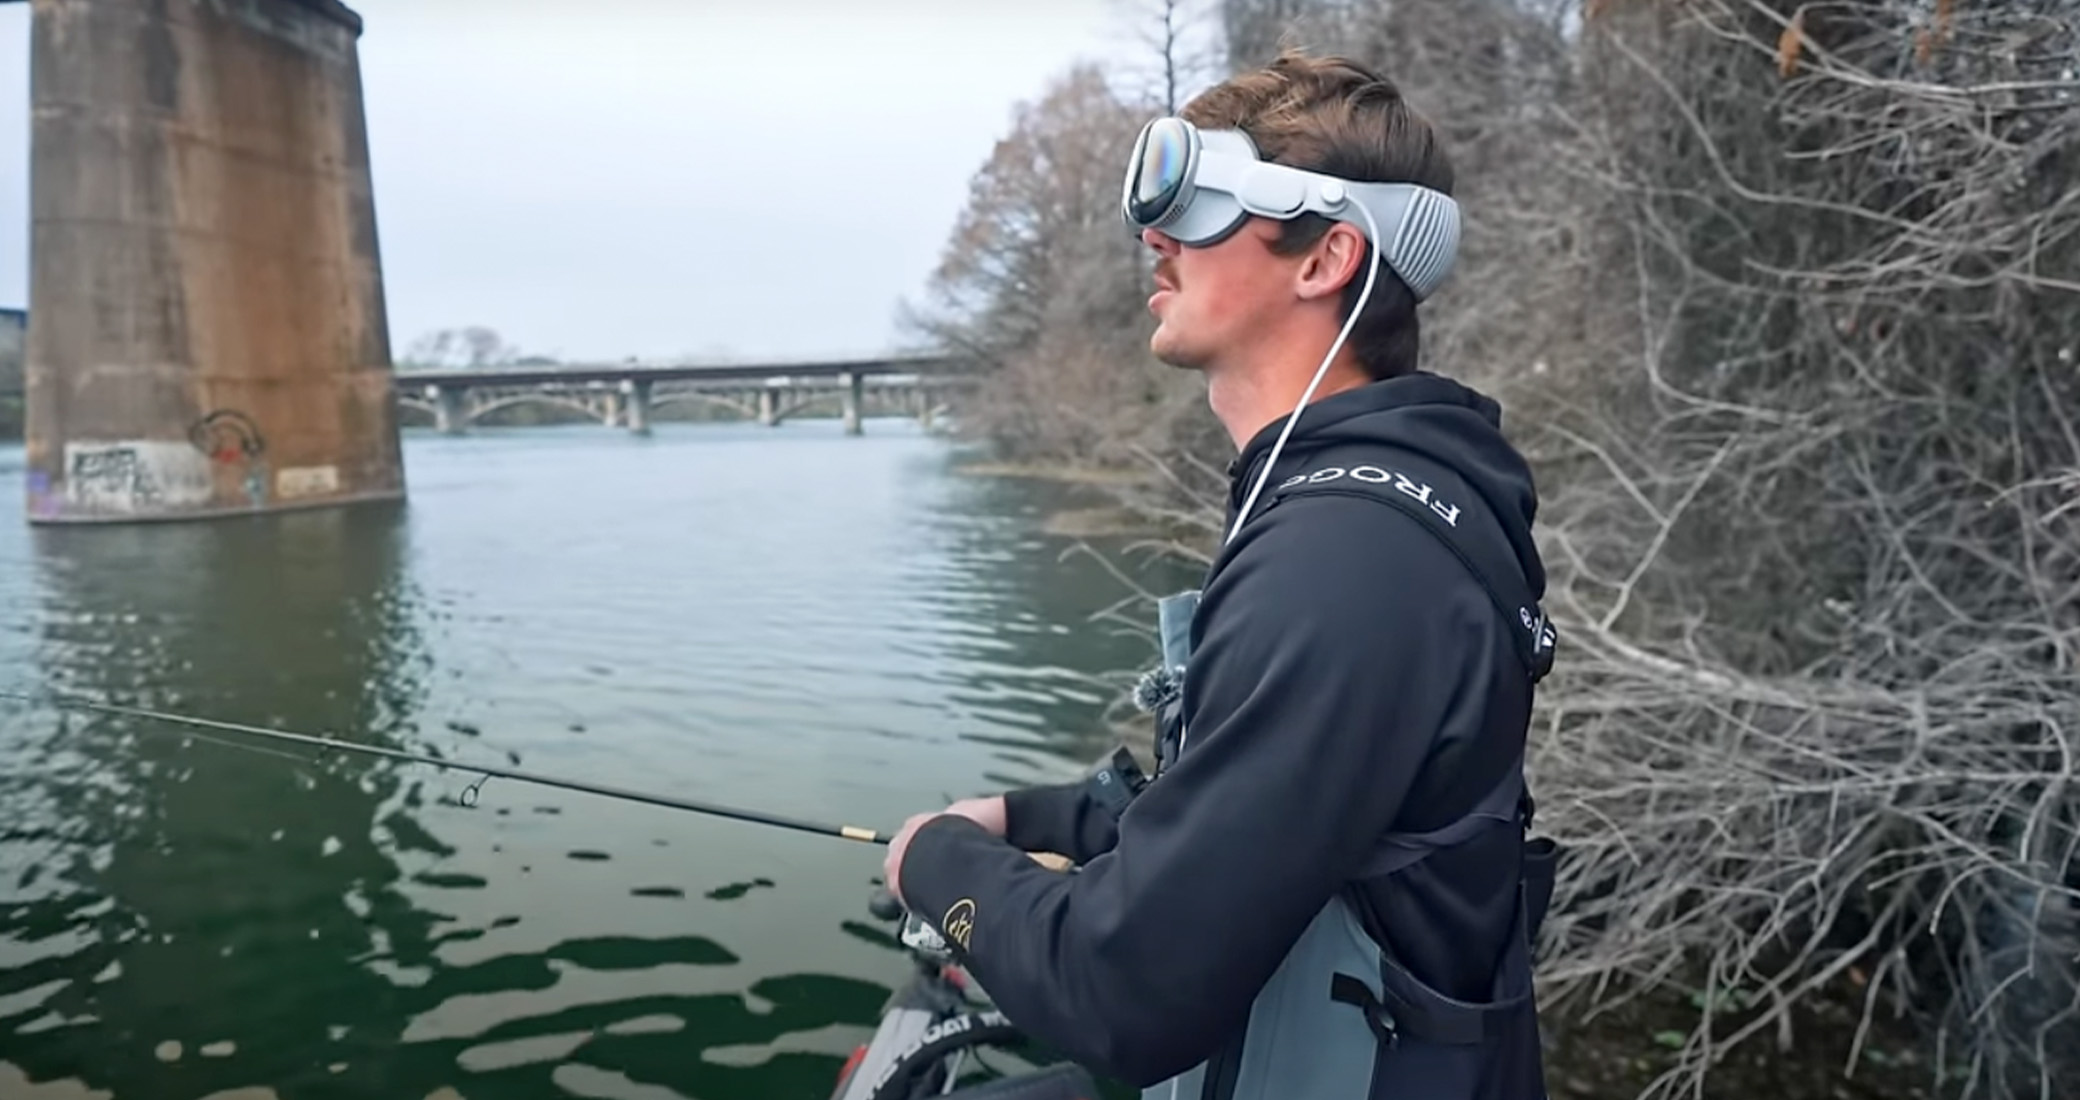 A bass angler fishes while wearing 3D goggles.